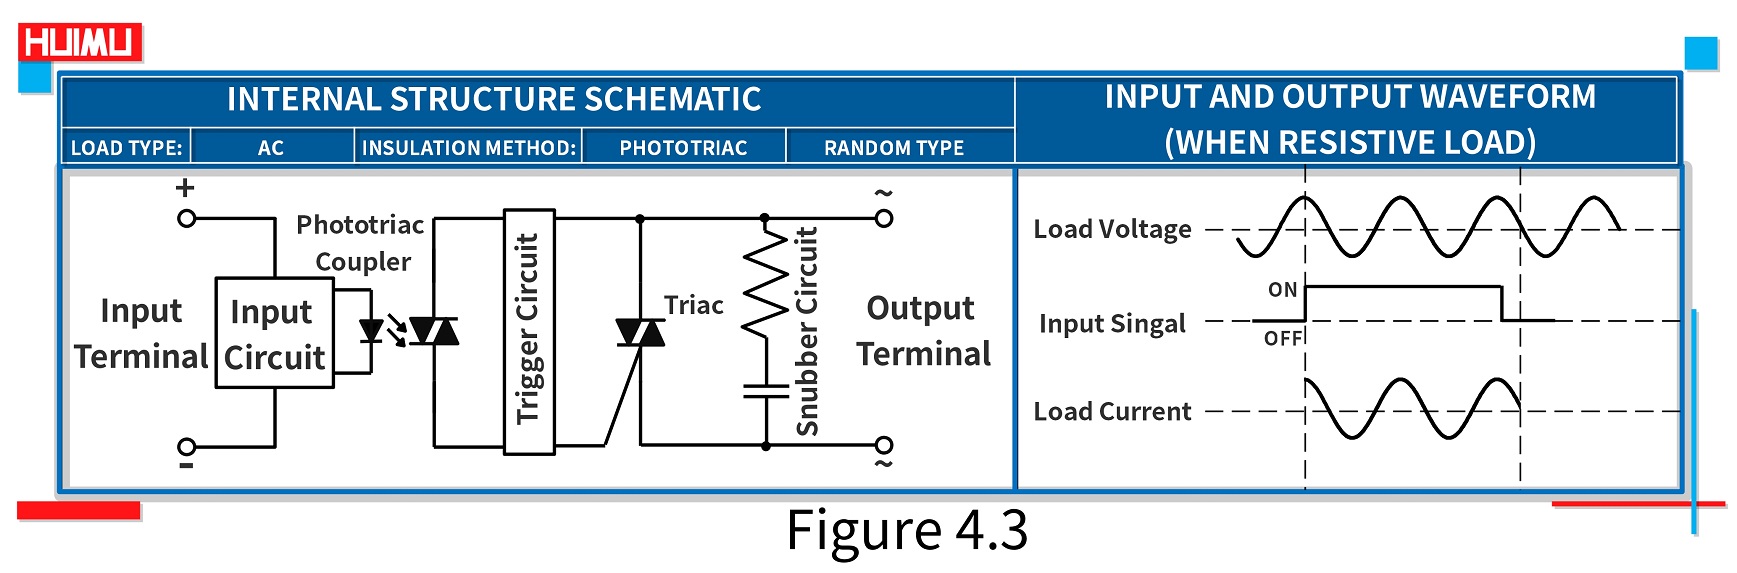 The internal structure schematic and waveform of Random Conduction Type AC solid state relays